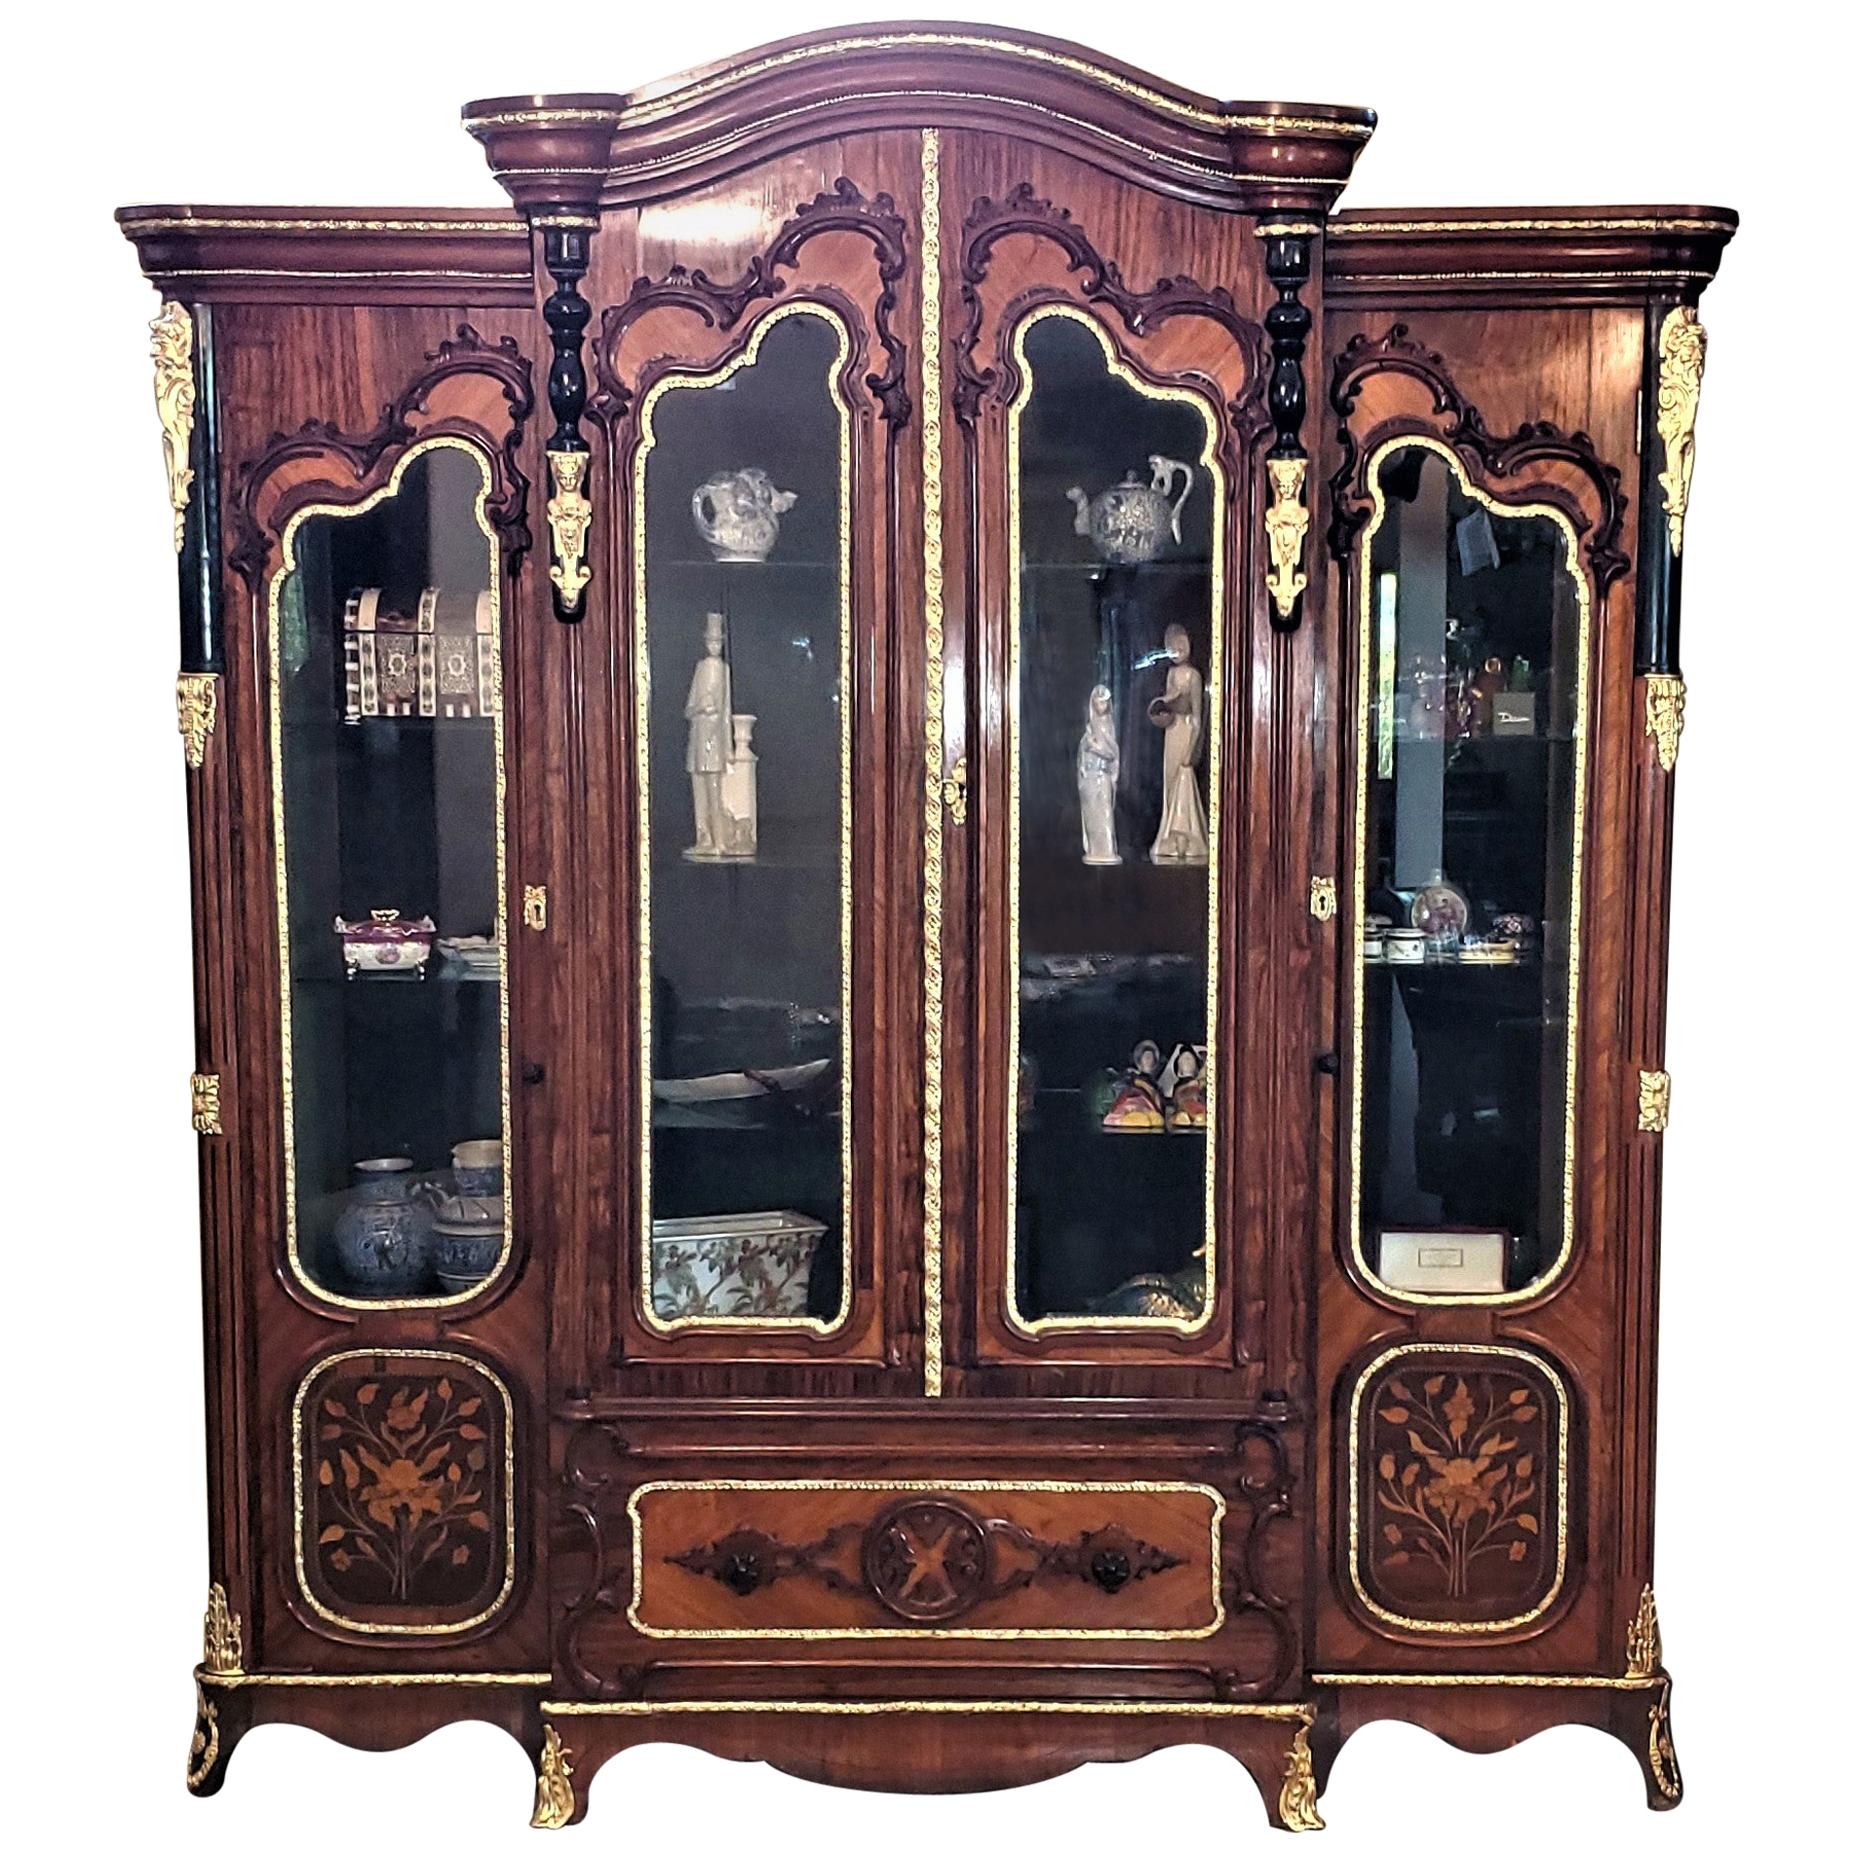 Large 19 Century French Rococo or Neoclassical Revival Style Vitrine For Sale